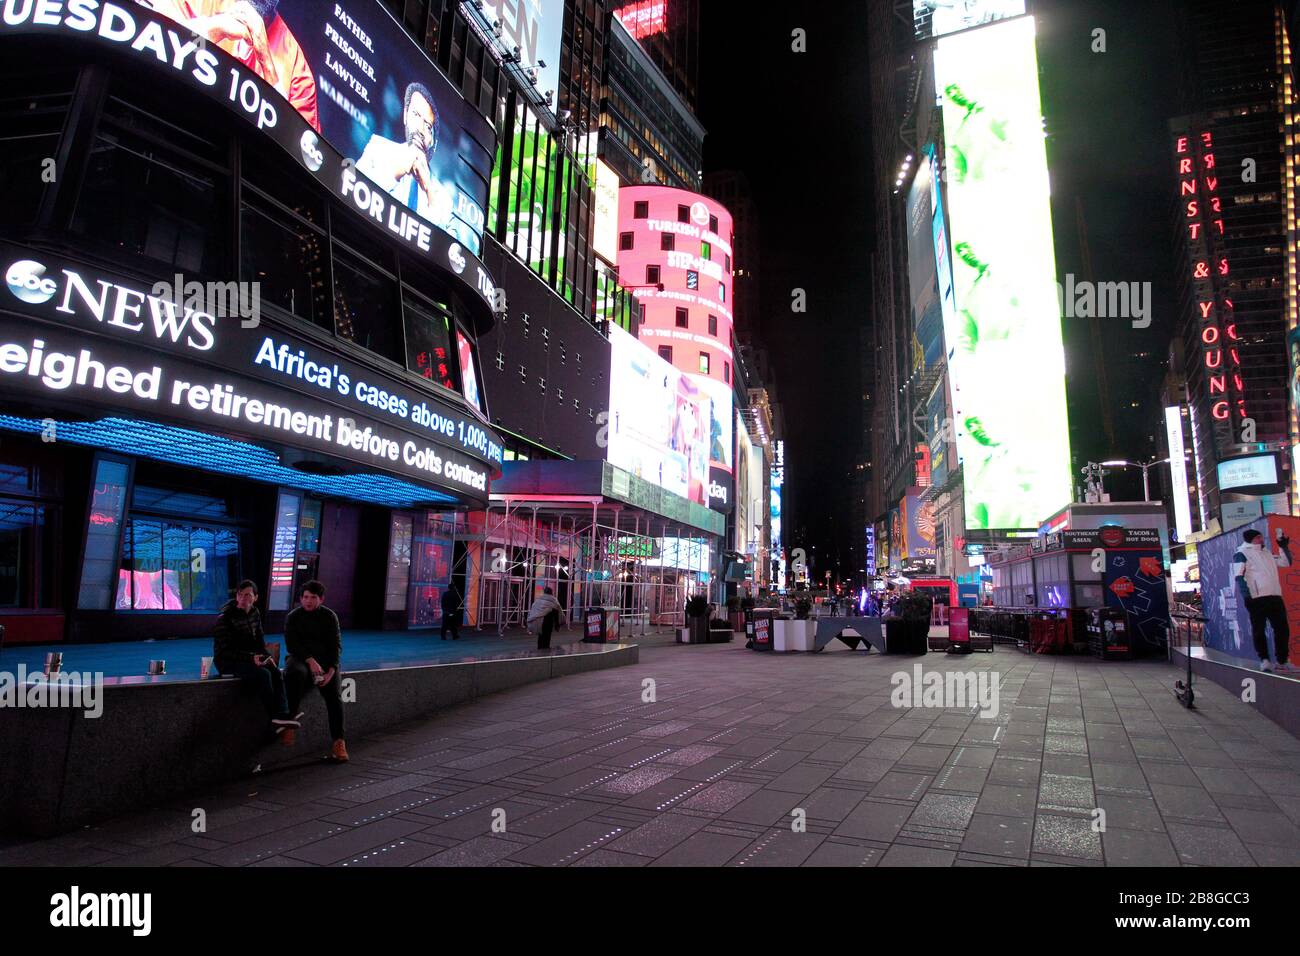 New York City, New York, United States. 21st Mar, 2020. Times Square in New York City on Saturday evening, March 21st, 2020 is largely devoid of people as New Yorker's heeded warning to stay at home in light of the coronavirus pandemic. Credit: Adam Stoltman/Alamy Live News Stock Photo